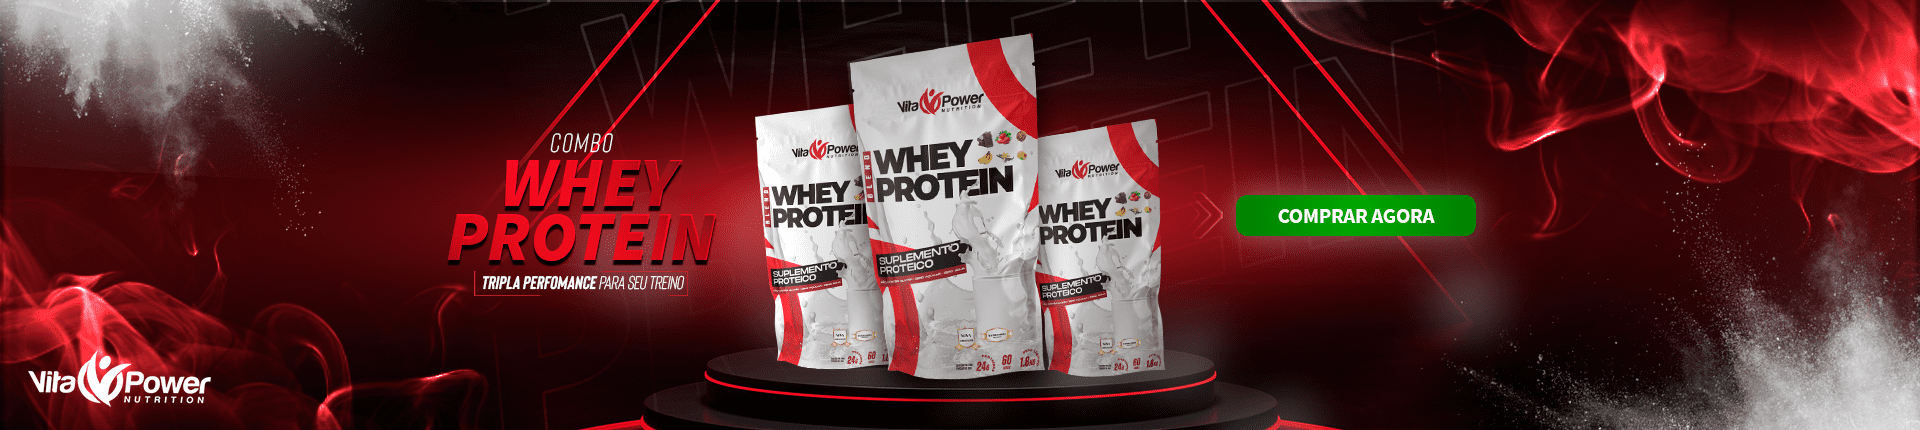 banner home - whey 01